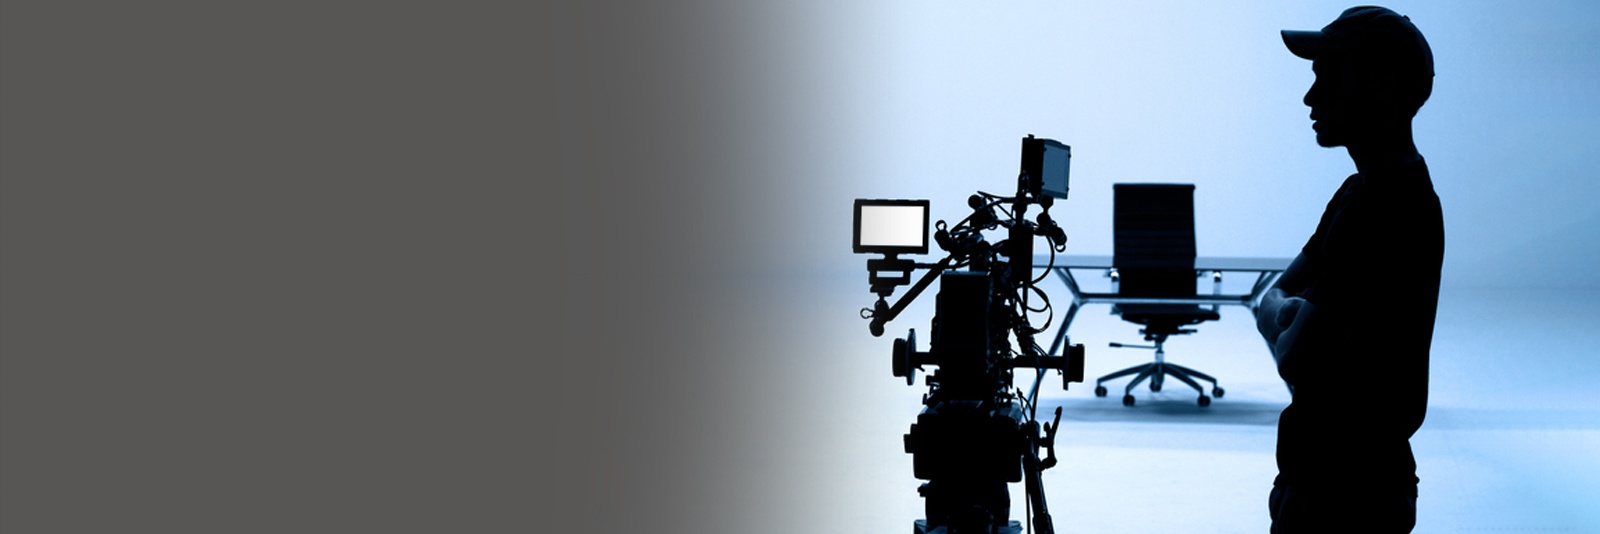 Corporate Video Production & Video Marketing for Businesses in Washington, DC